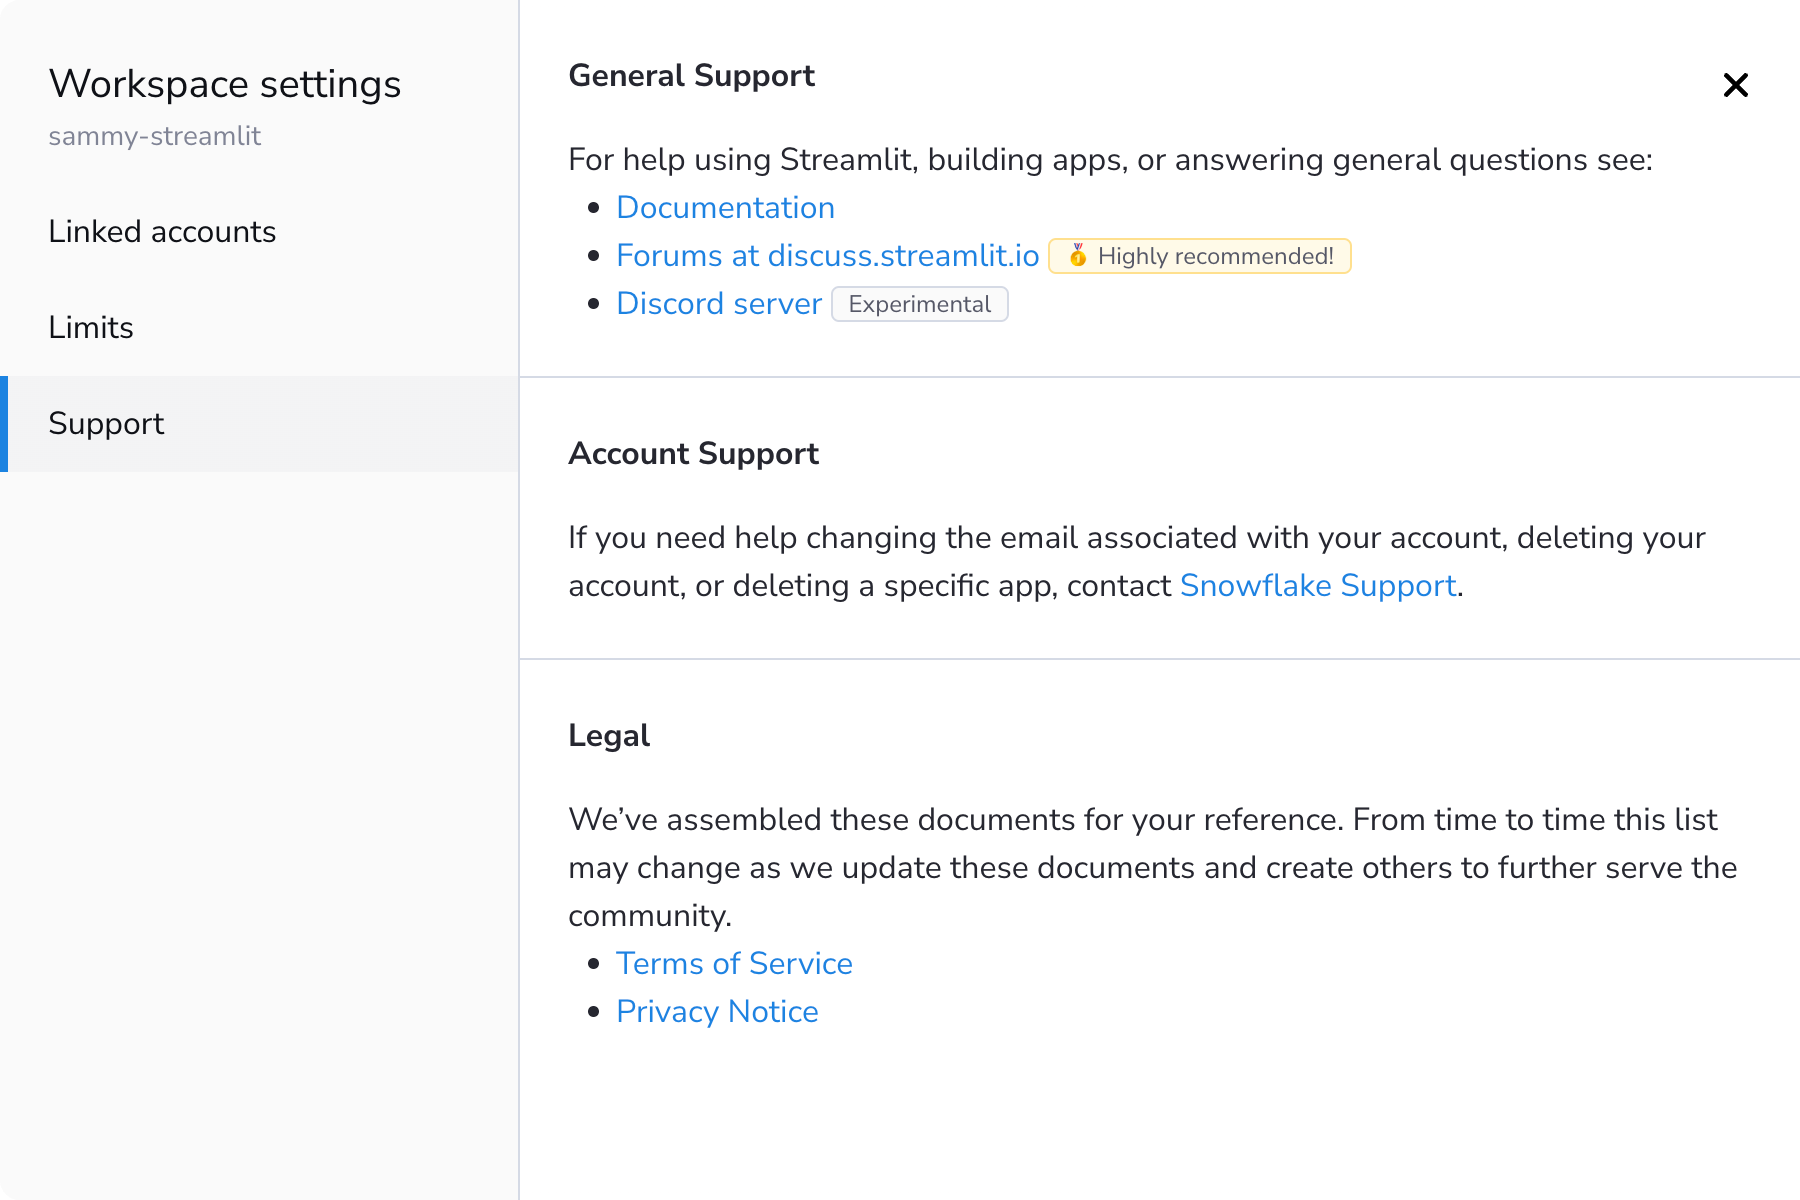 Support options available through workspace settings